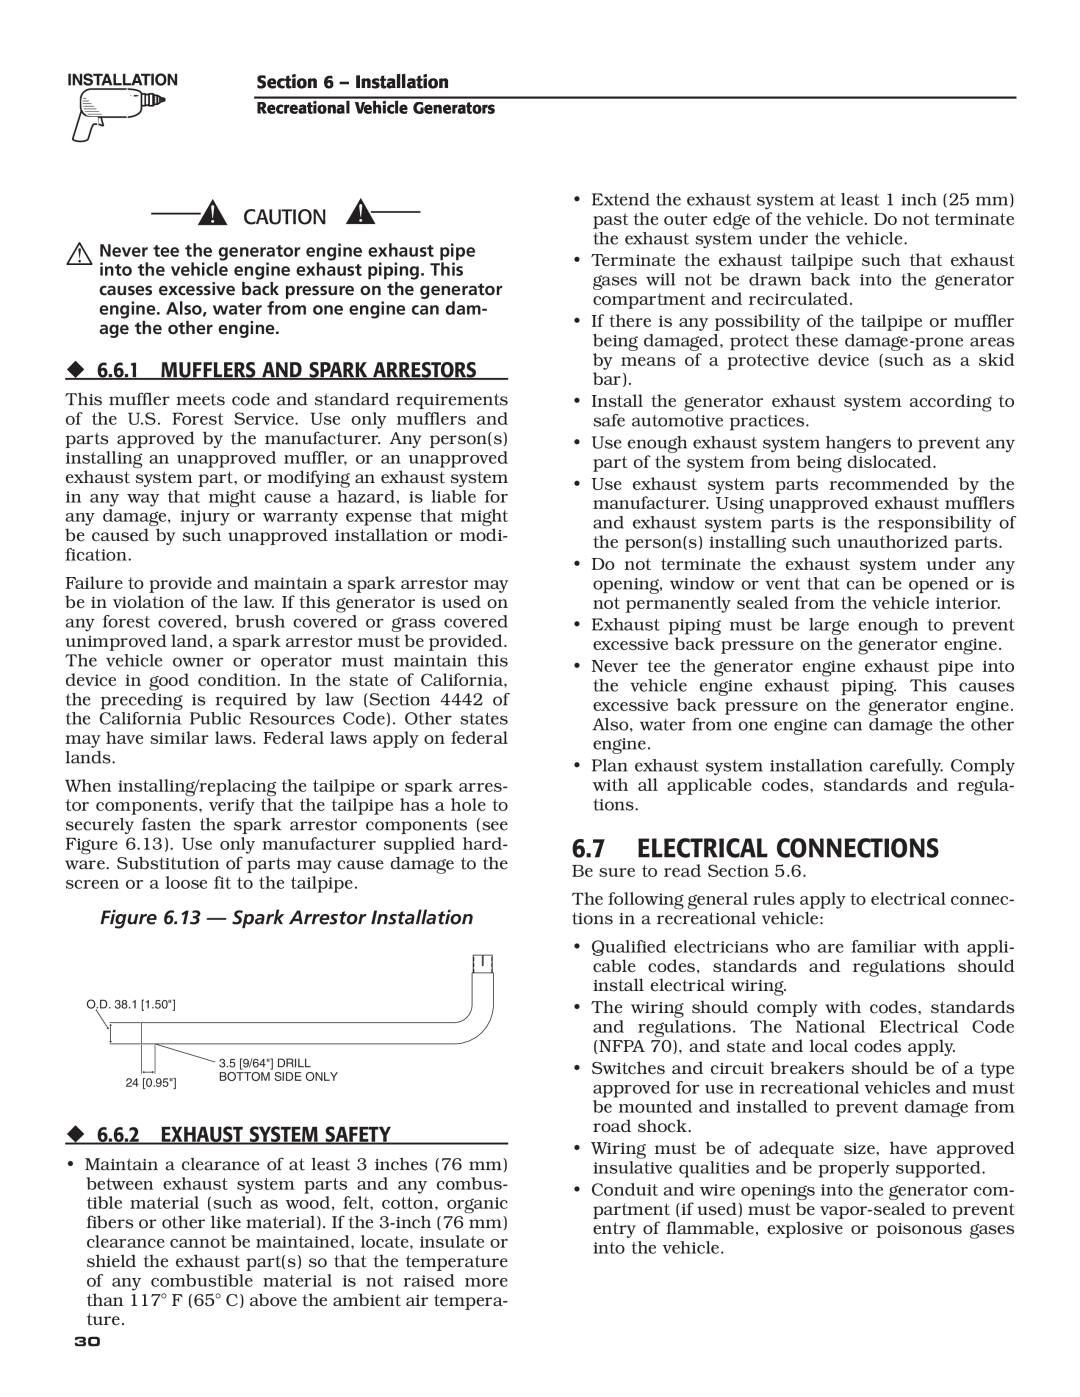 Guardian Technologies 004702-0, 004703-0, 004704-0, 004705-0, 004706-0, 004707-0 owner manual Electrical Connections 